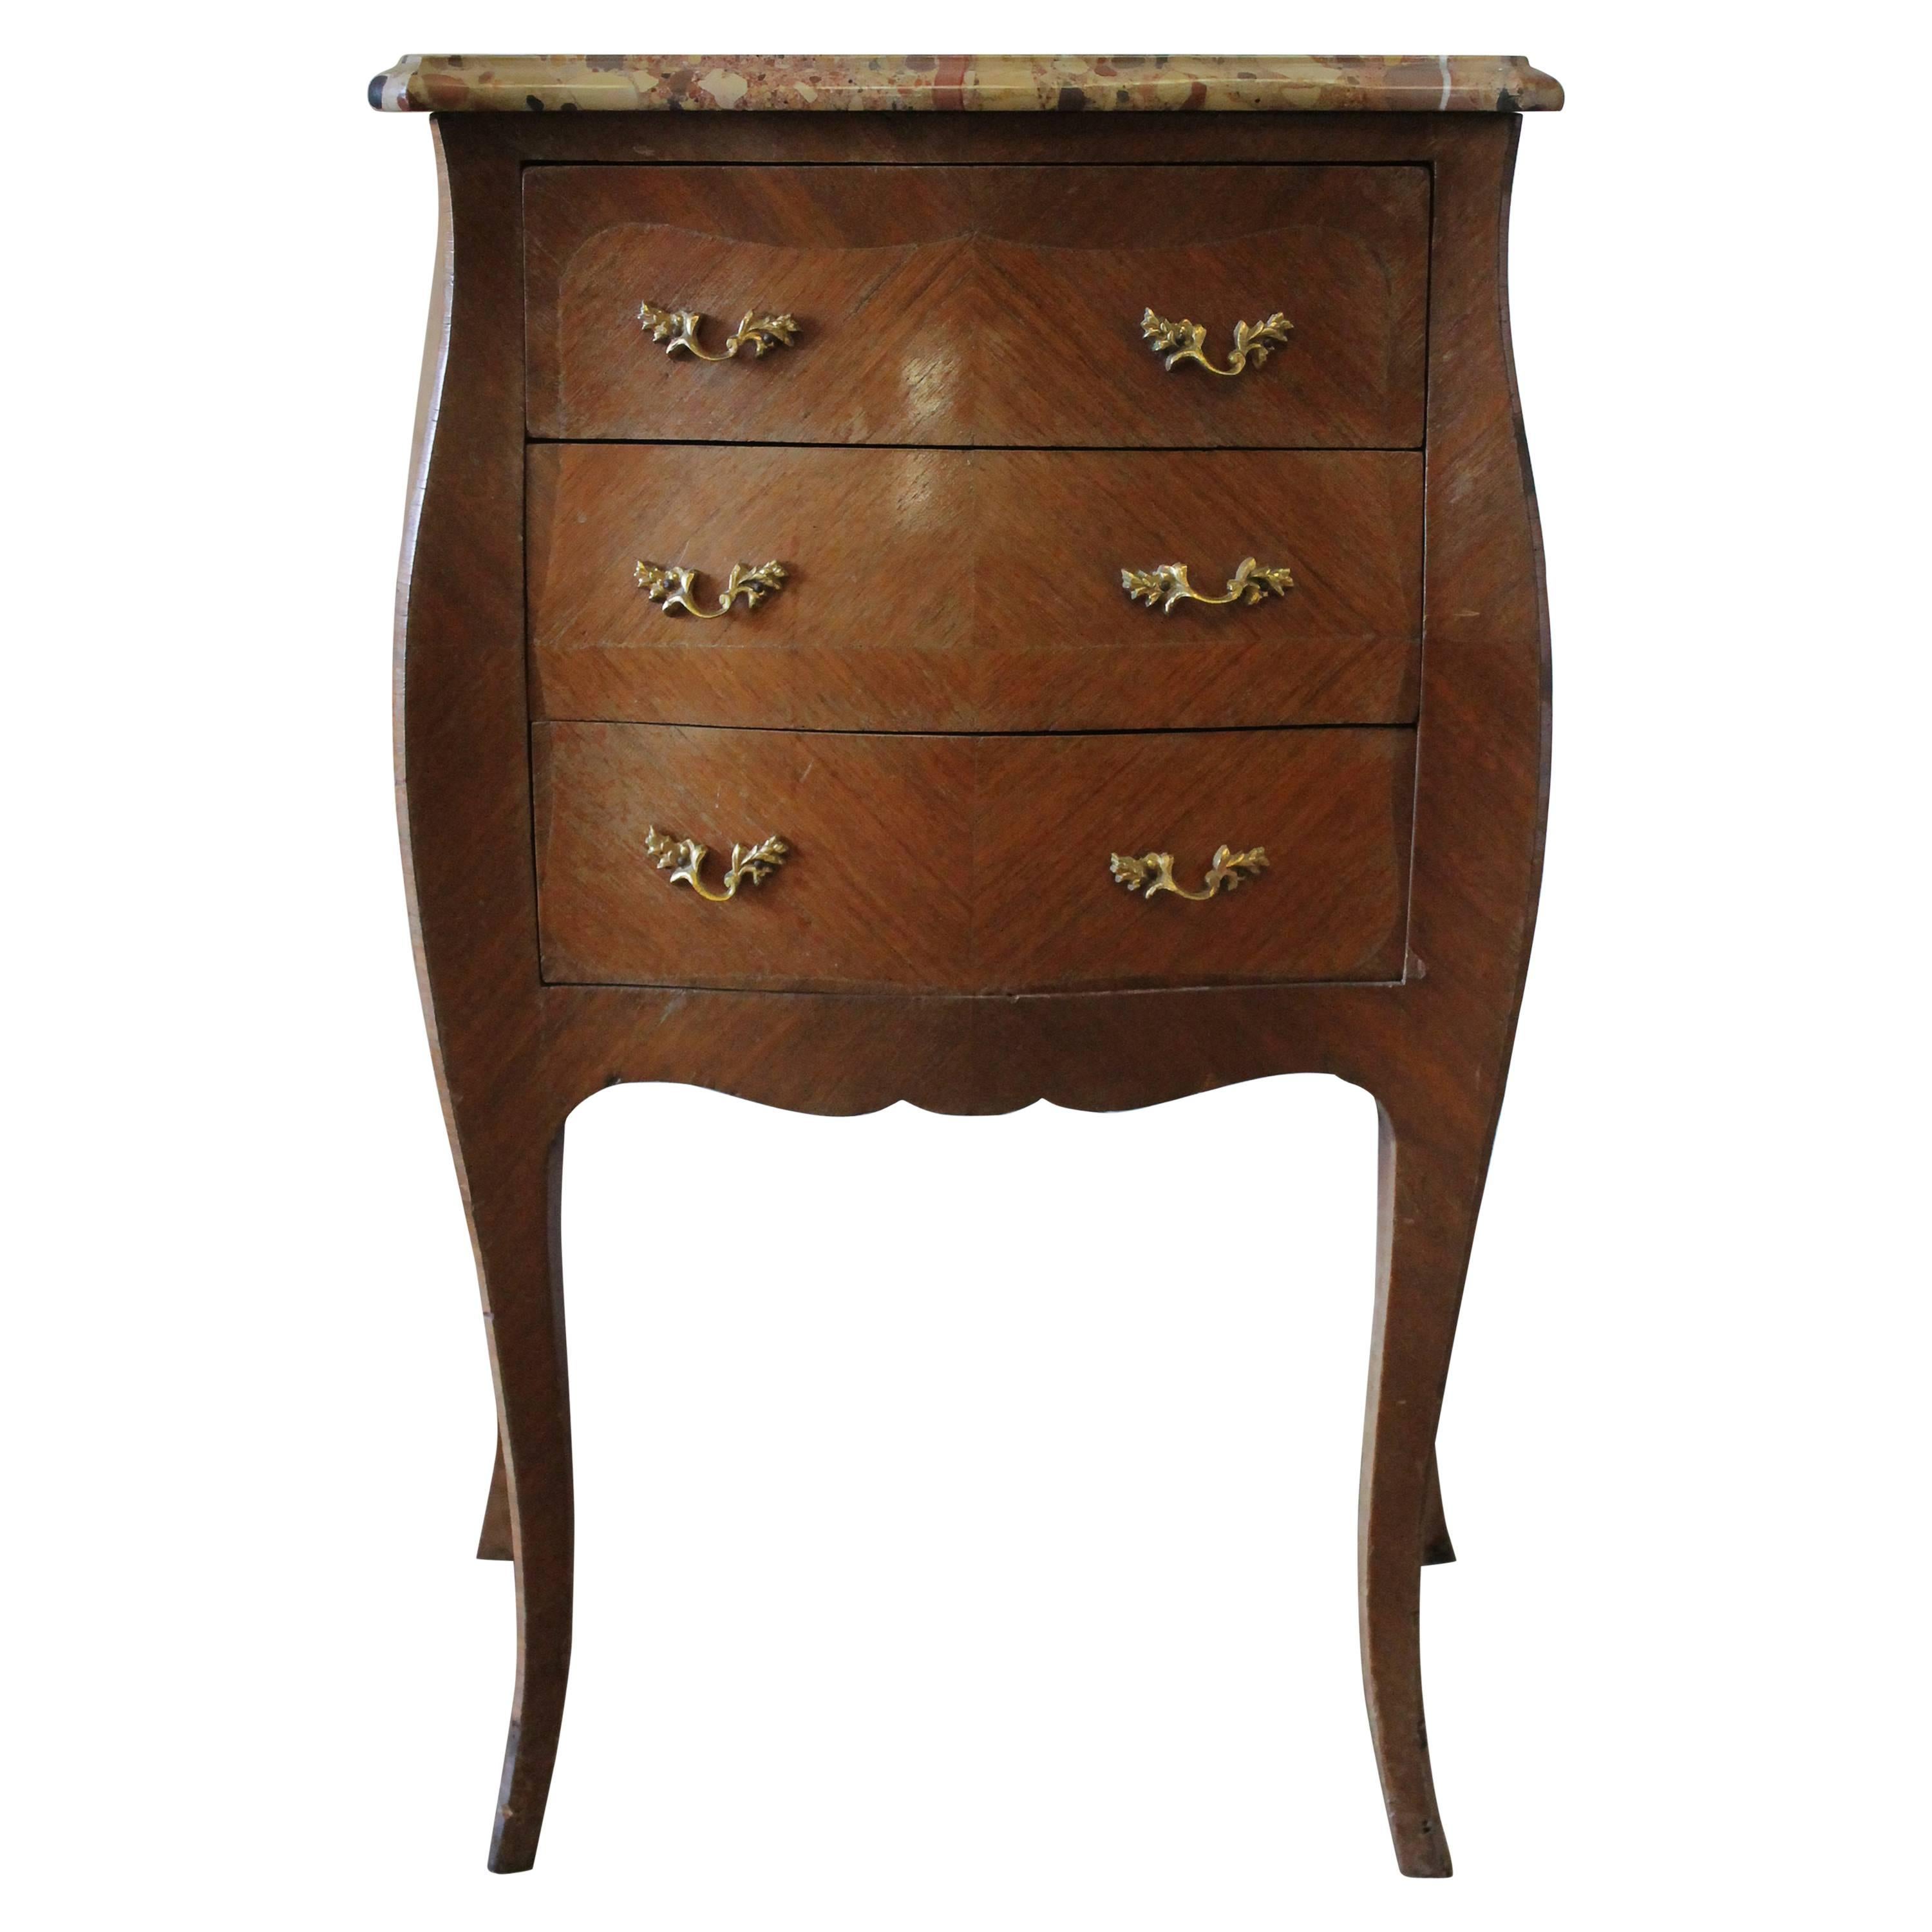 19th Century Italian Inlay Commode Side Table with Three Drawers and Marble Top